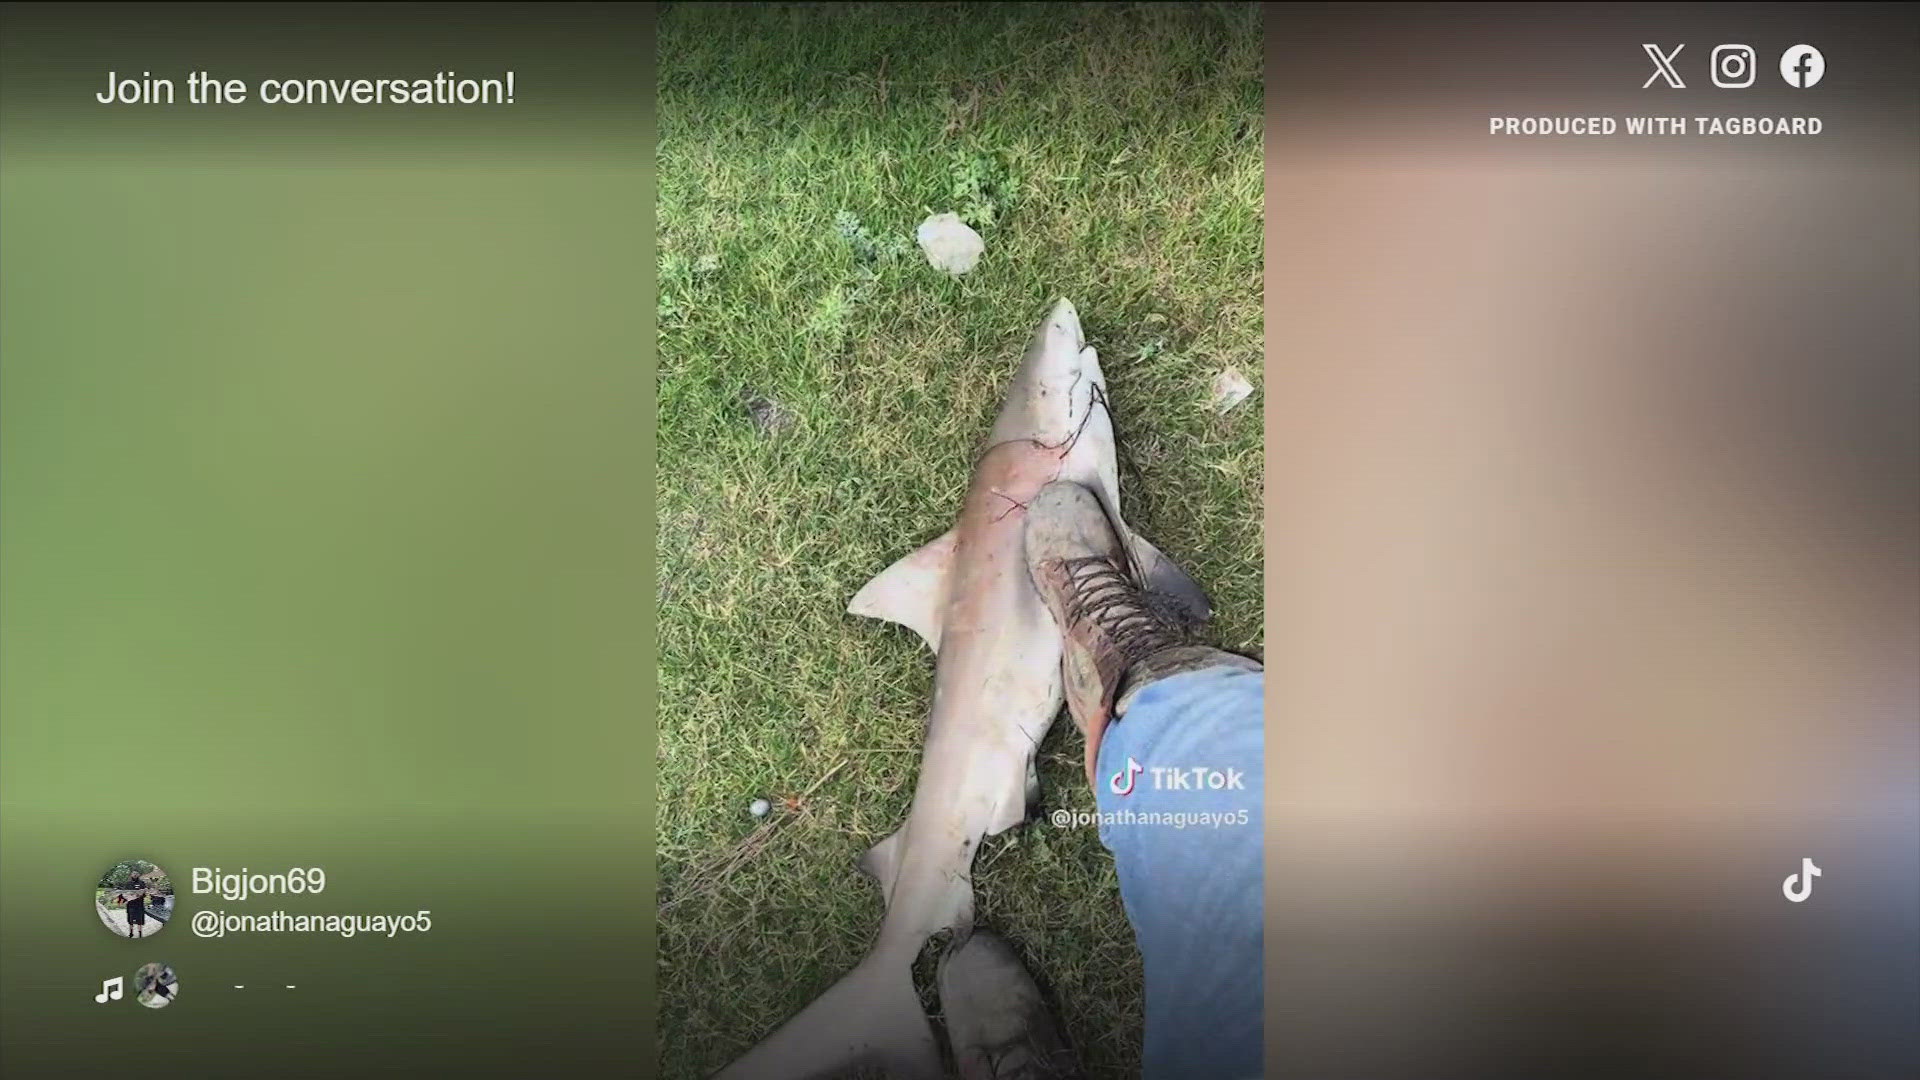 A recent TikTok video showed a man allegedly catching a shark in a Central Texas river.